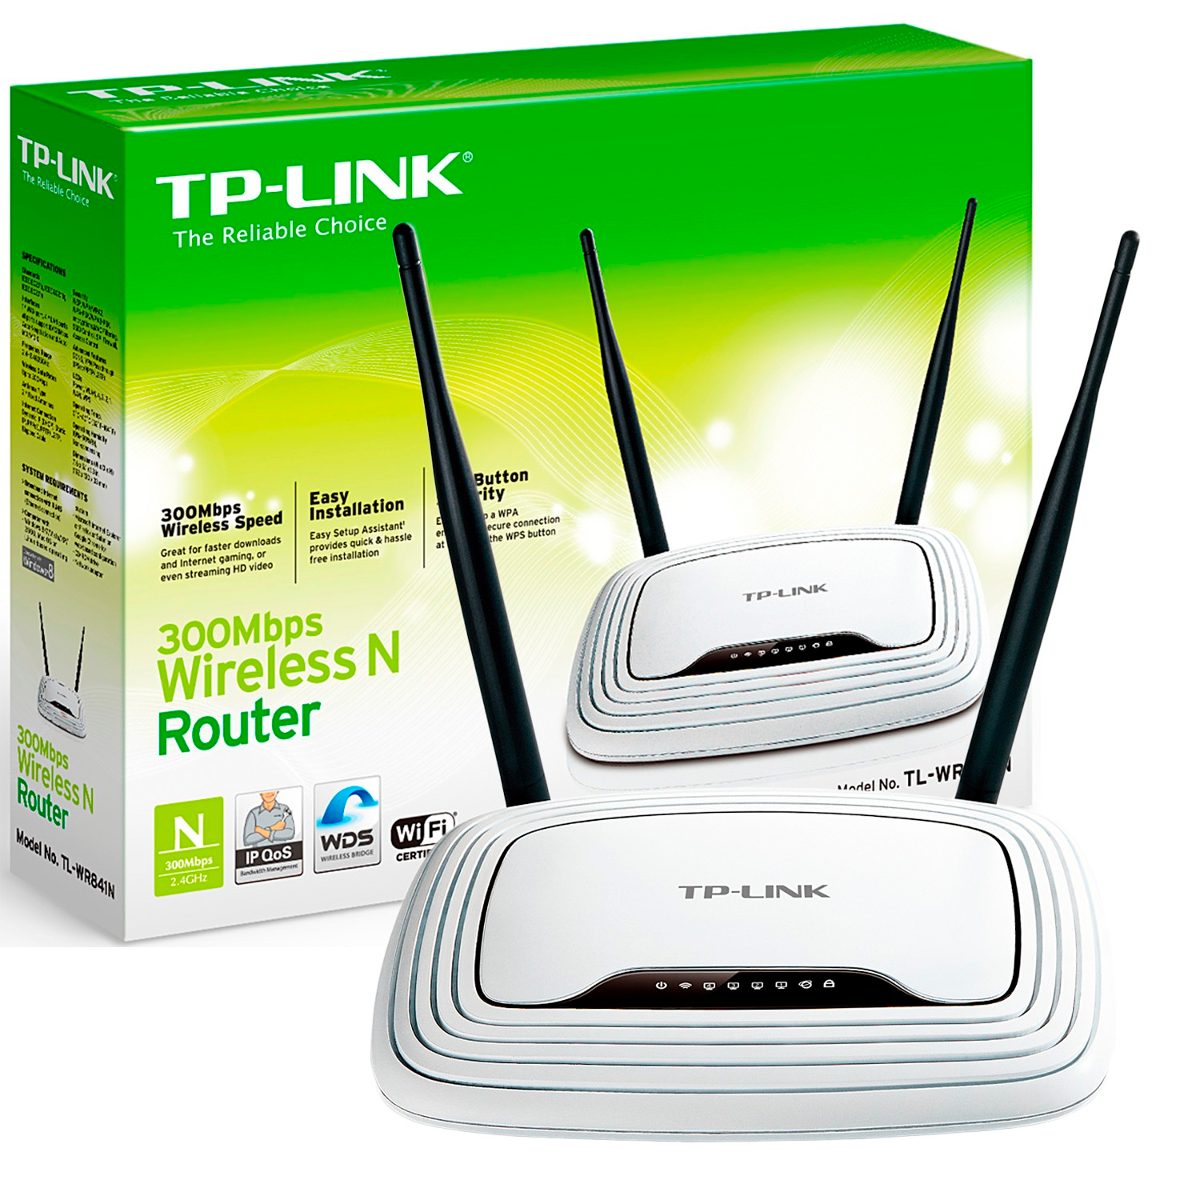 TP-LINK WR841ND 300M Wireless N Router, 2 Non-Detachable Antennas 2T2R, Atheros 2.4GHz 802.1 - Click Image to Close